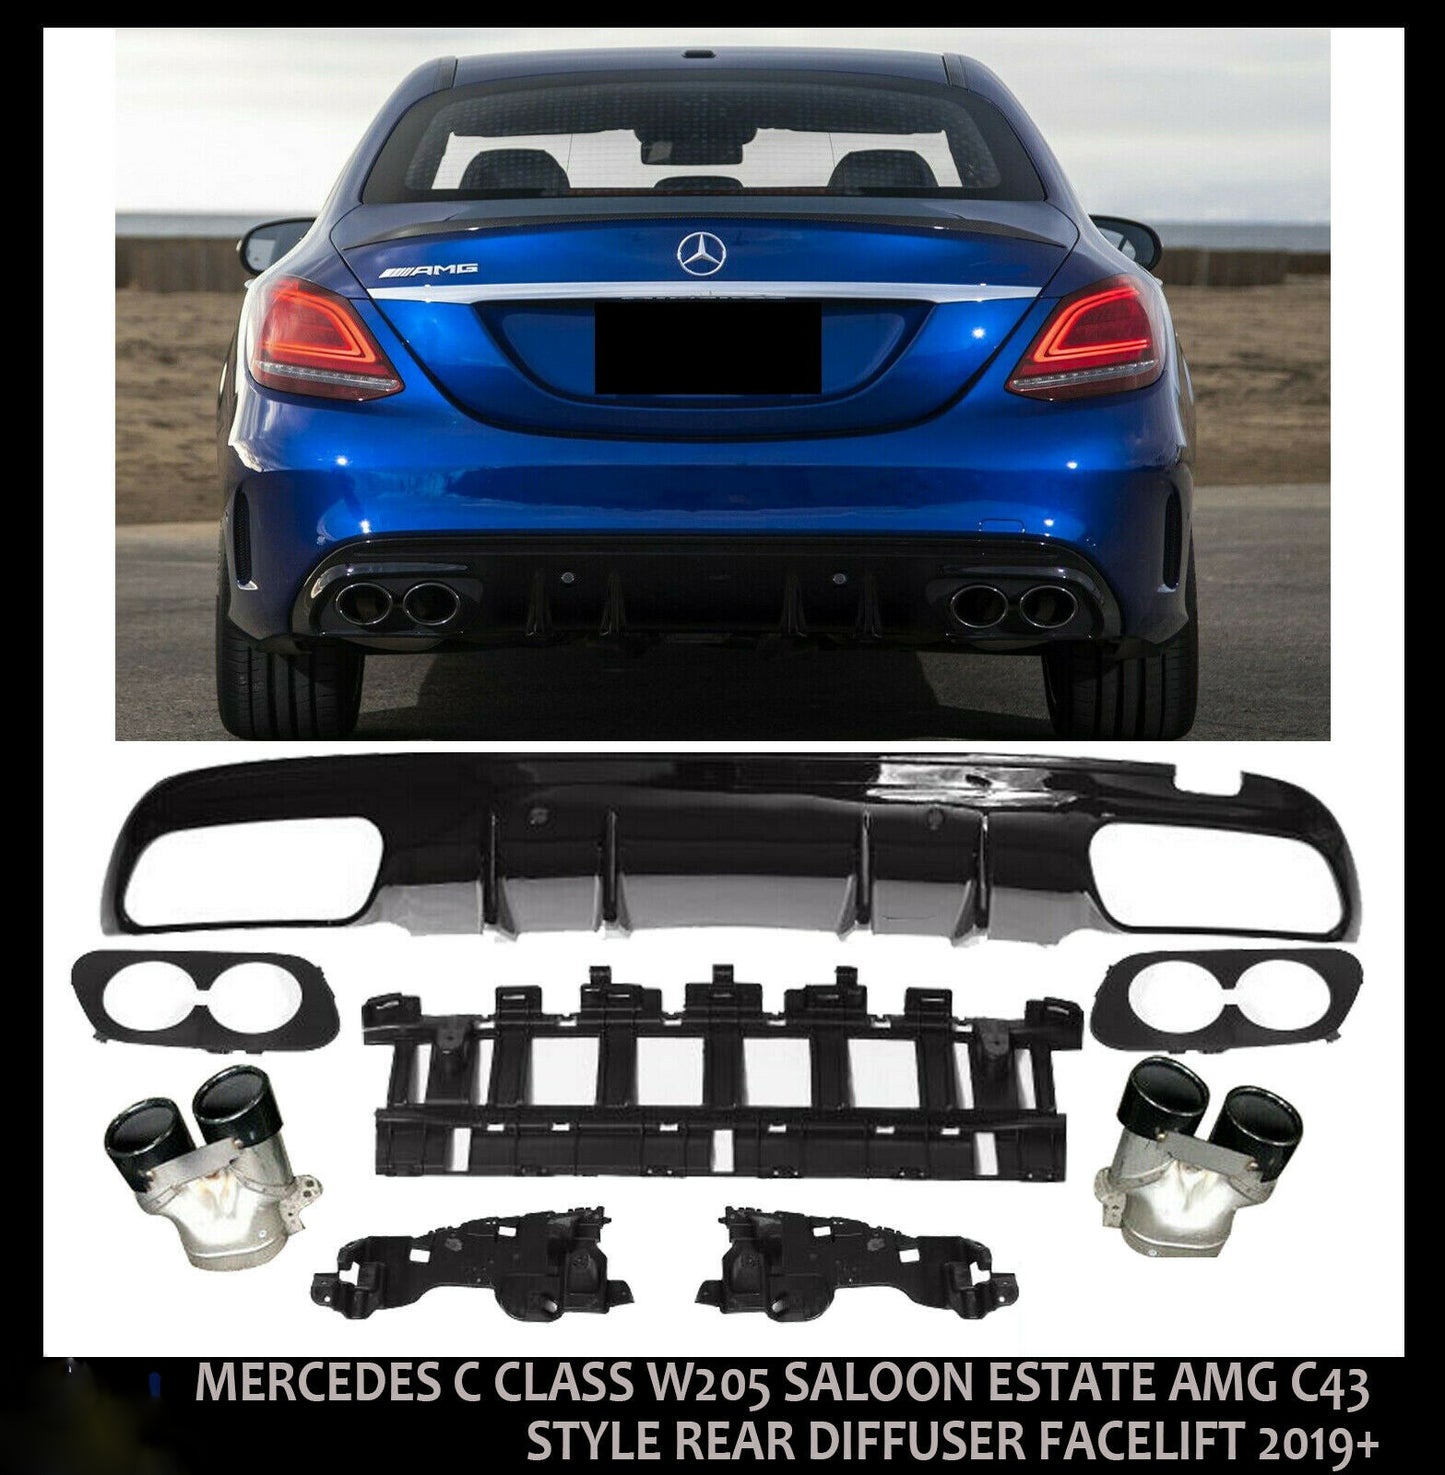 MERCEDES C CLASS W205 SALOON ESTATE AMG C43 STYLE REAR DIFFUSER FACELIFT 2019+